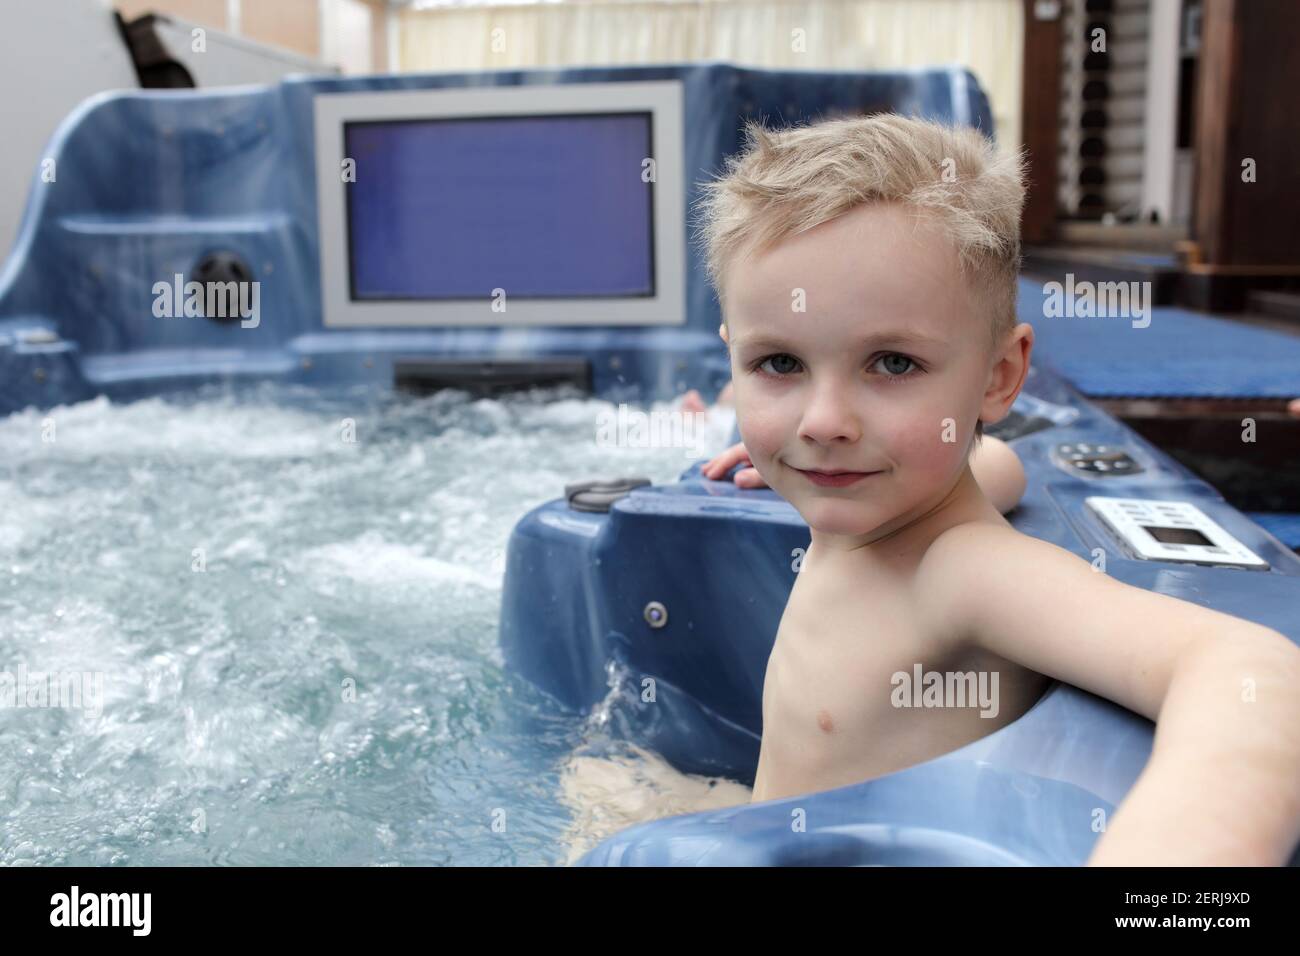 Boy sitting in the warm bubbling water jacuzzi Stock Photo